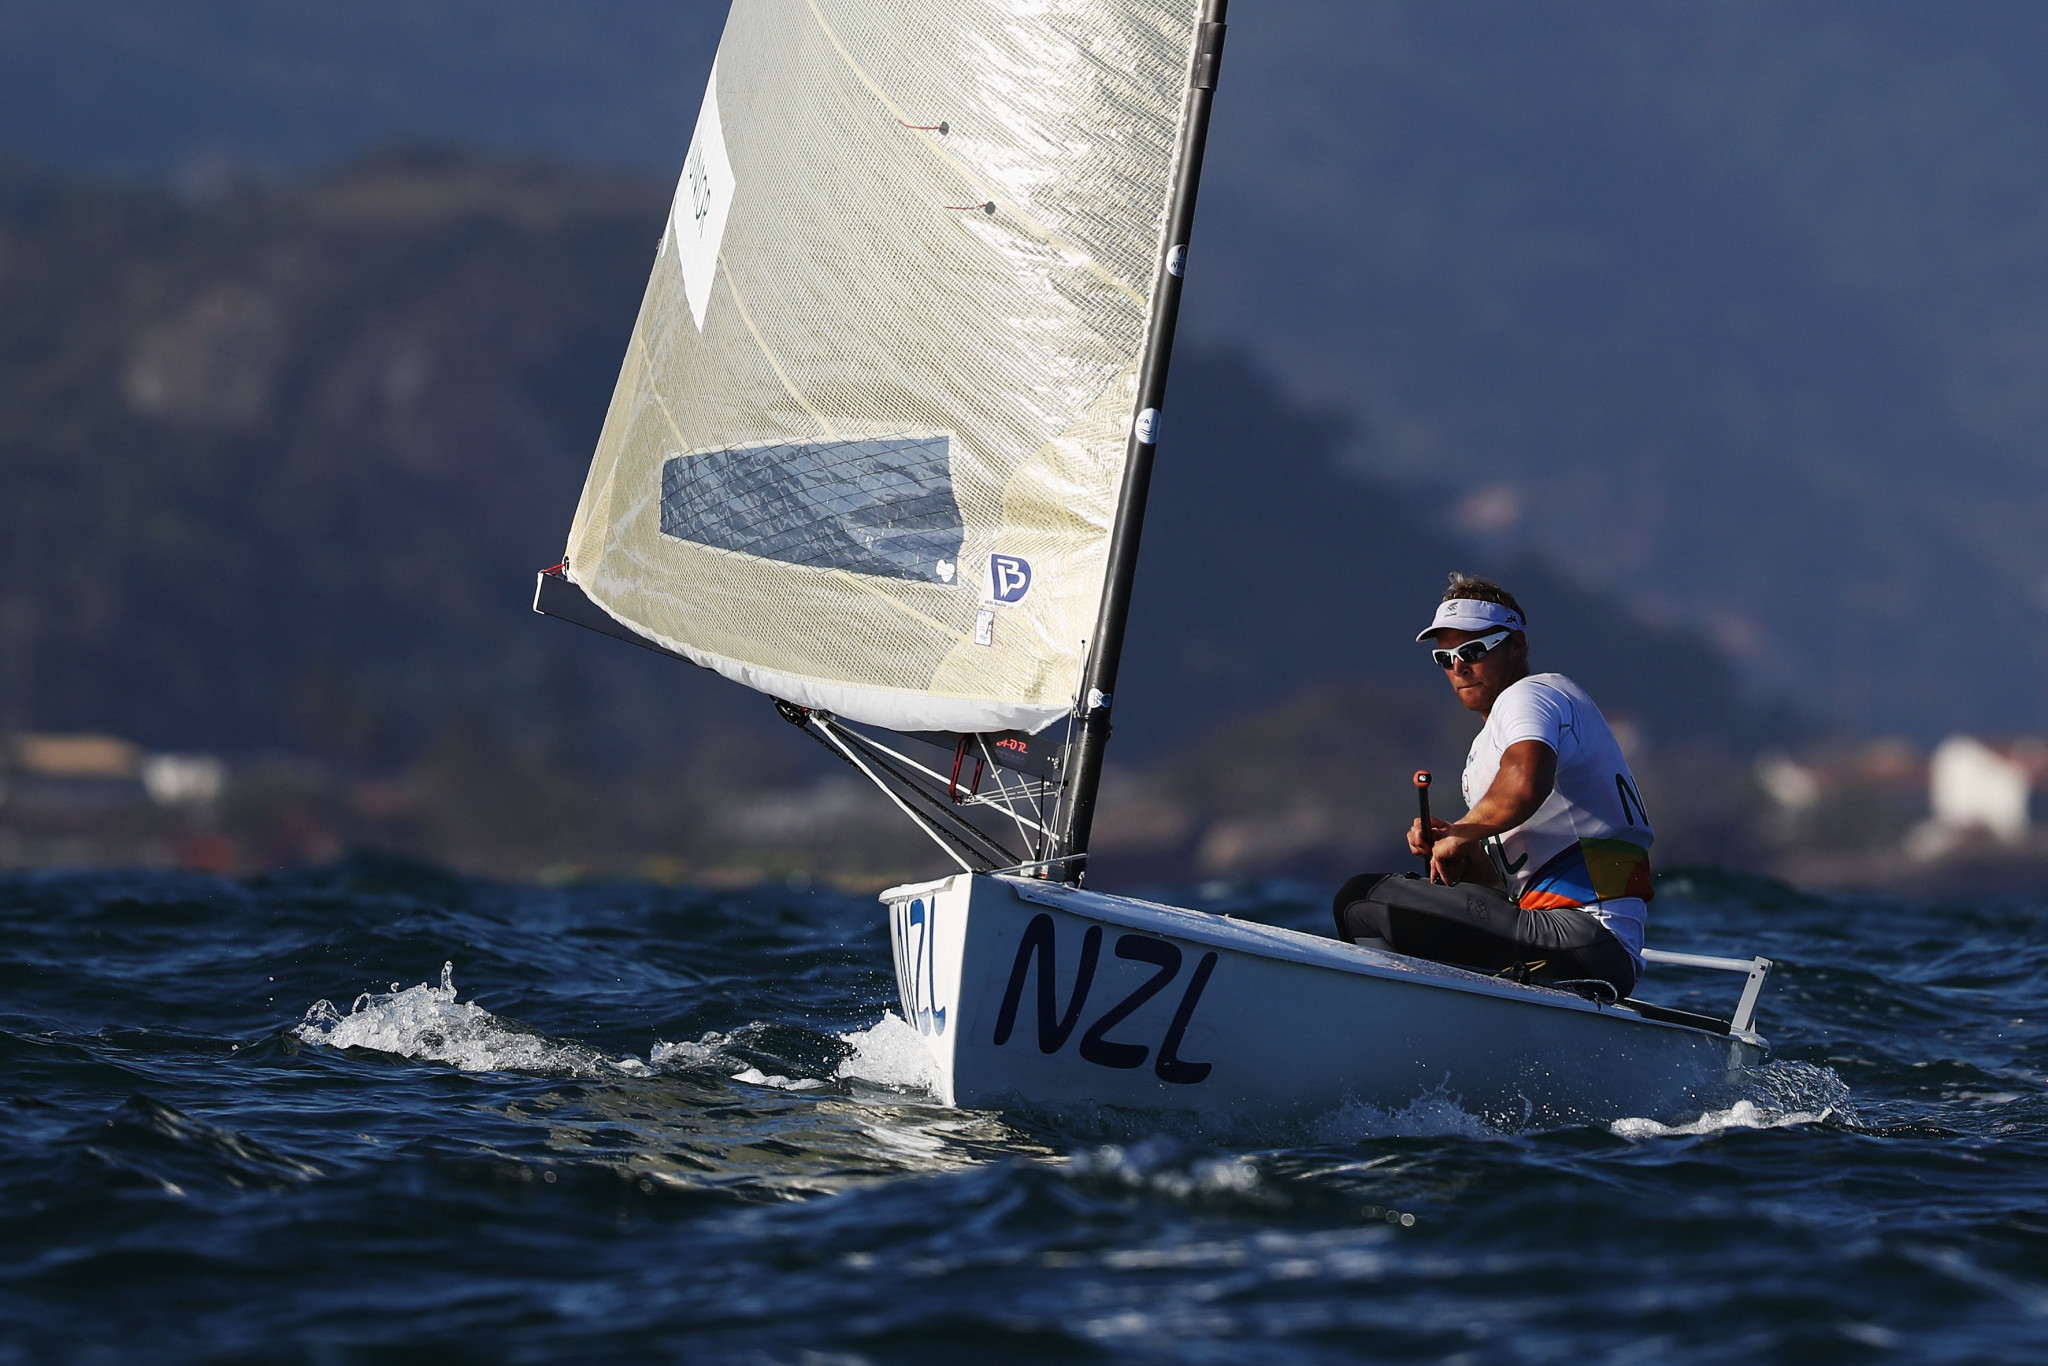 New Zealand's Josh Junior has taken a 14-point lead in the Finn Gold Cup overall standings ©Getty Images